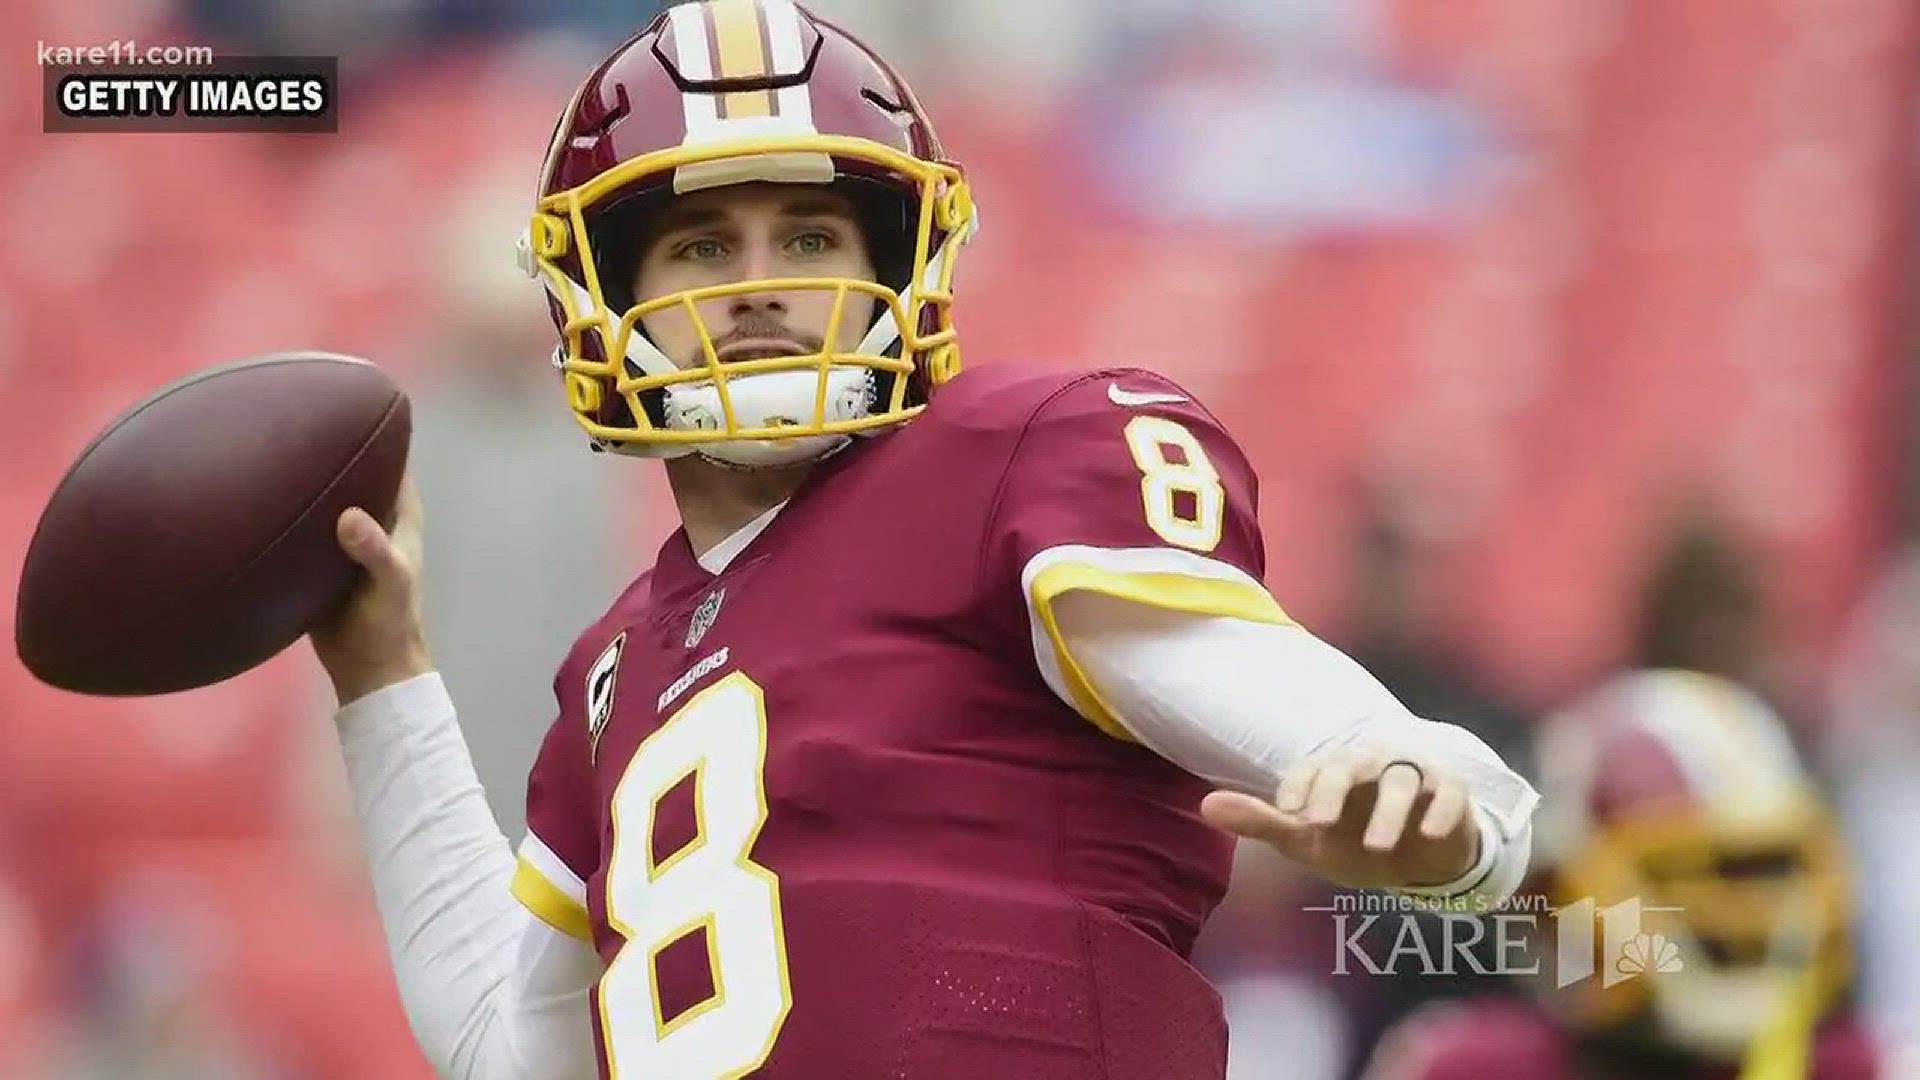 Multiple reports are saying Kirk Cousins will sign with the Vikings for around $28 million. That's $10 million more than Keenum is expected to get with the Broncos. So, is Cousins worth it?